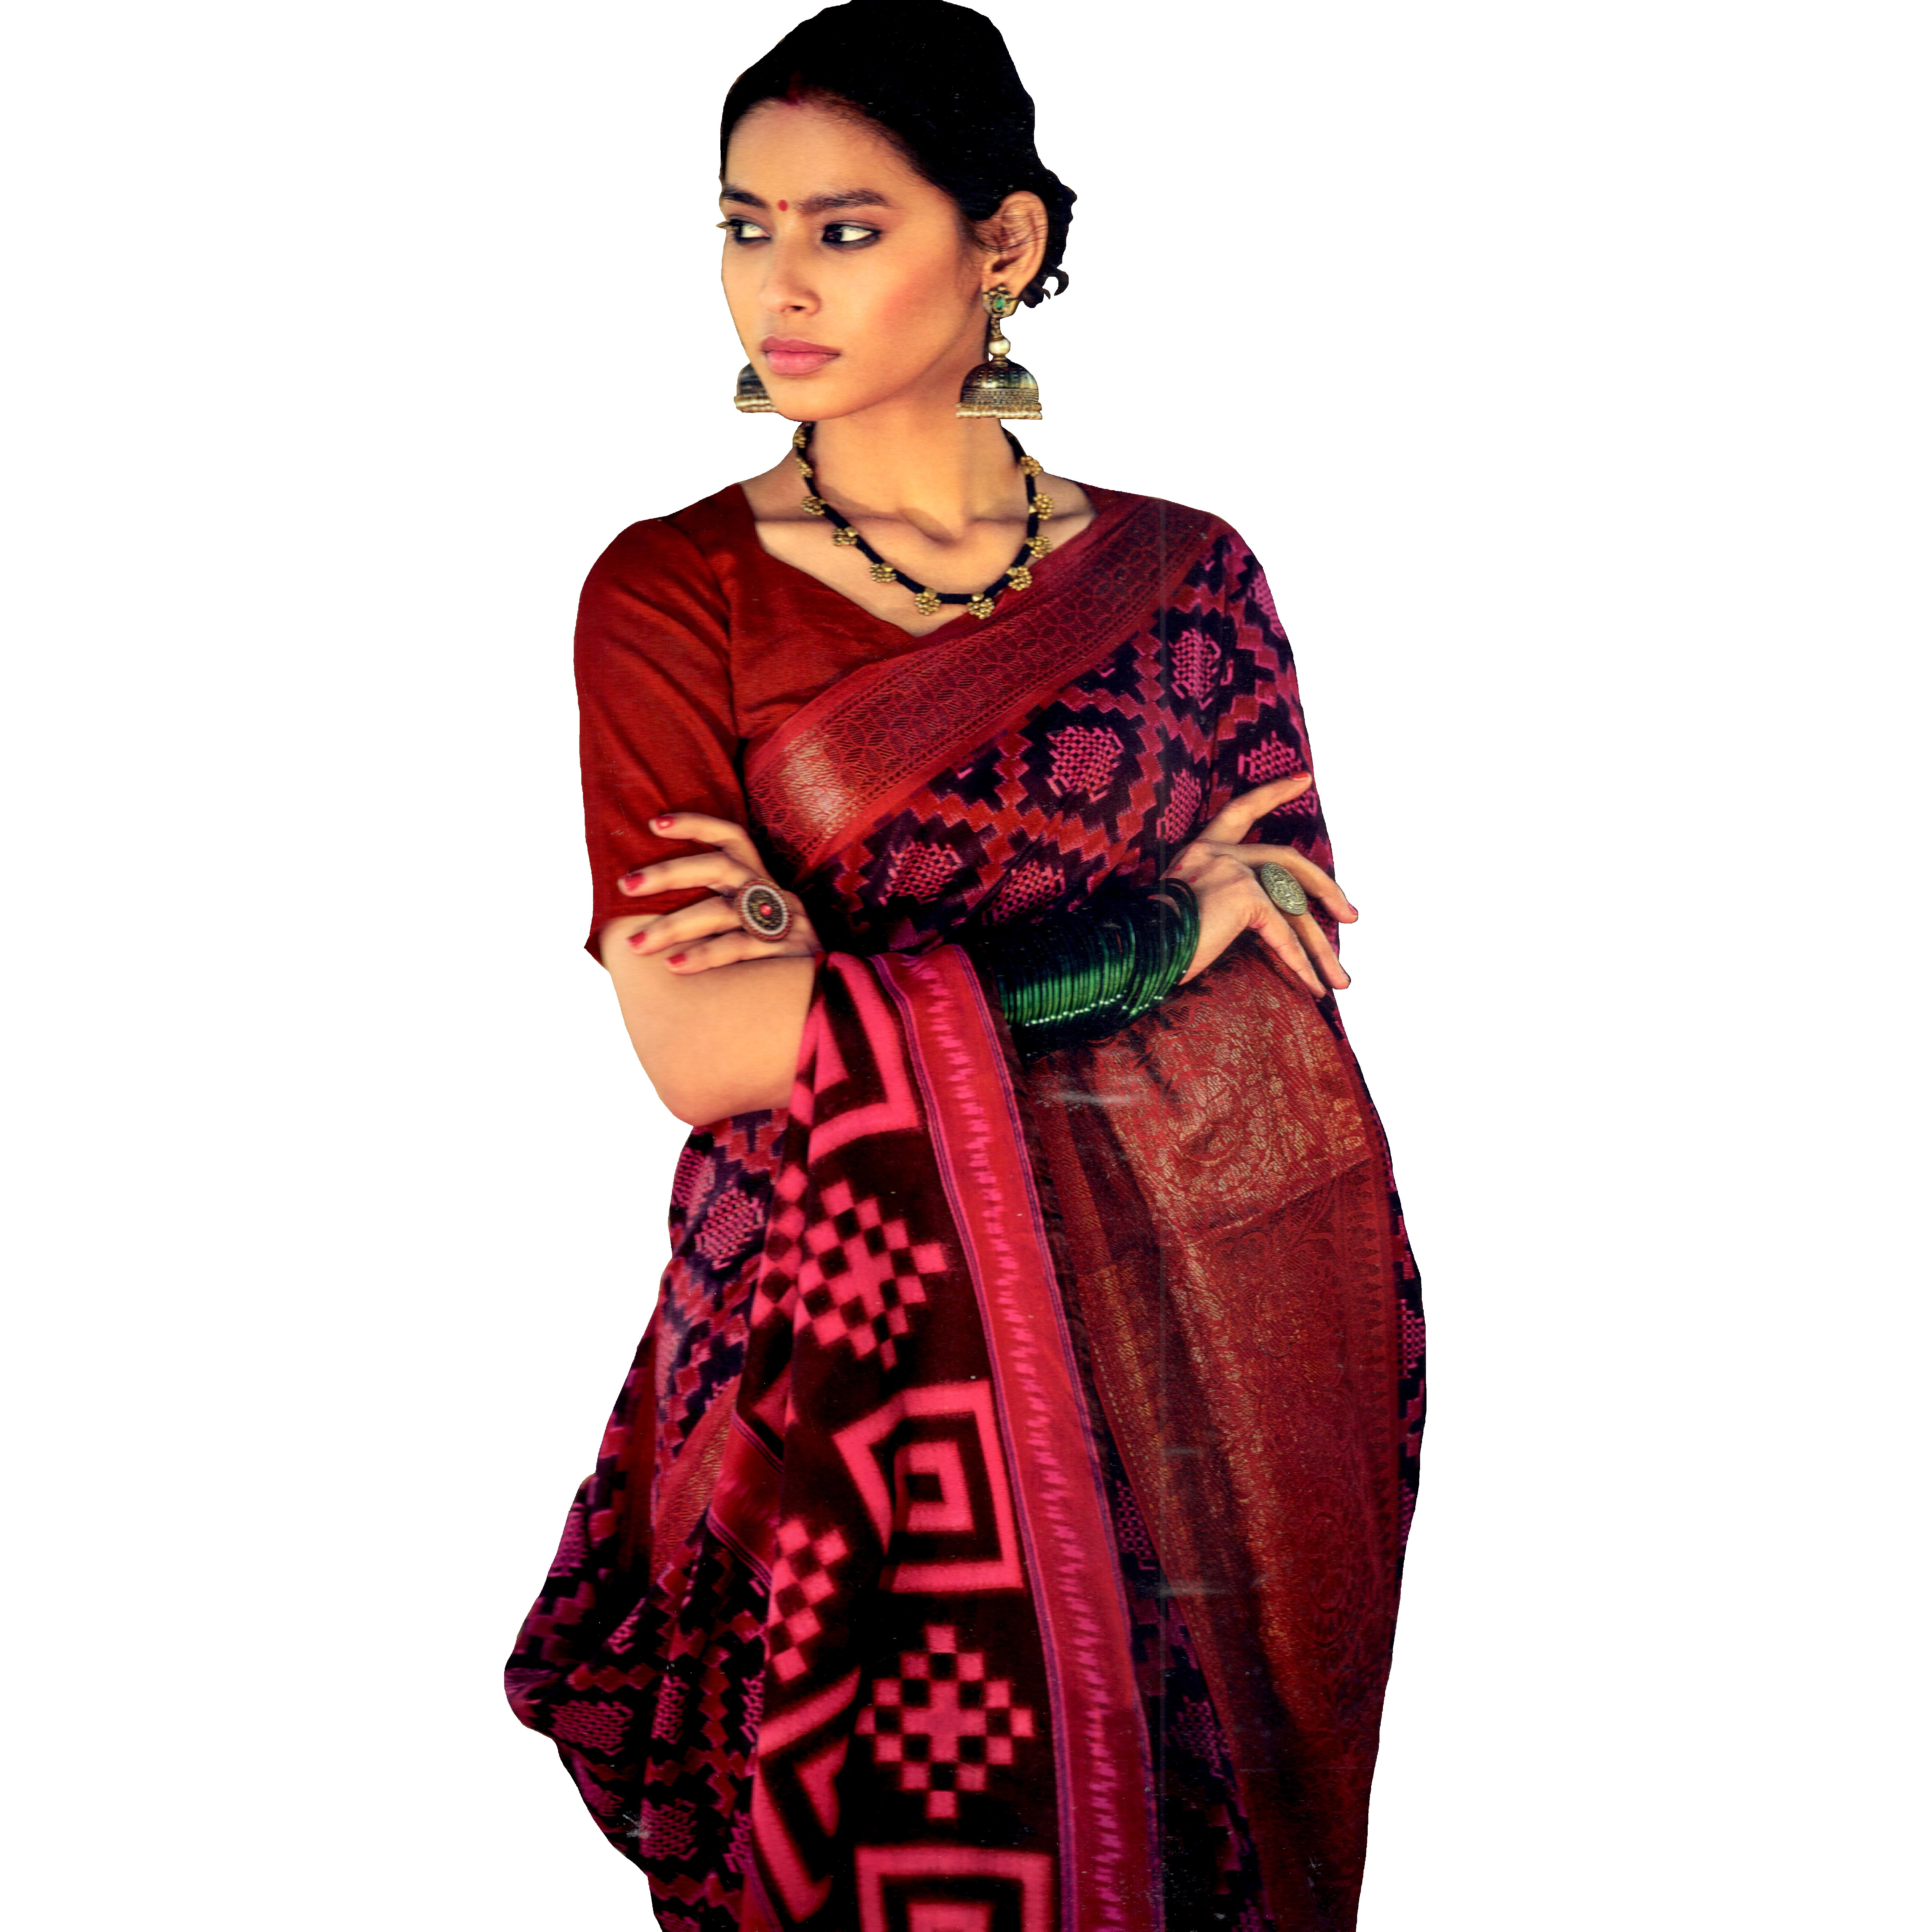 MAHATI Linen Silk Sarees with Stitched Blouse (Size: XXL)